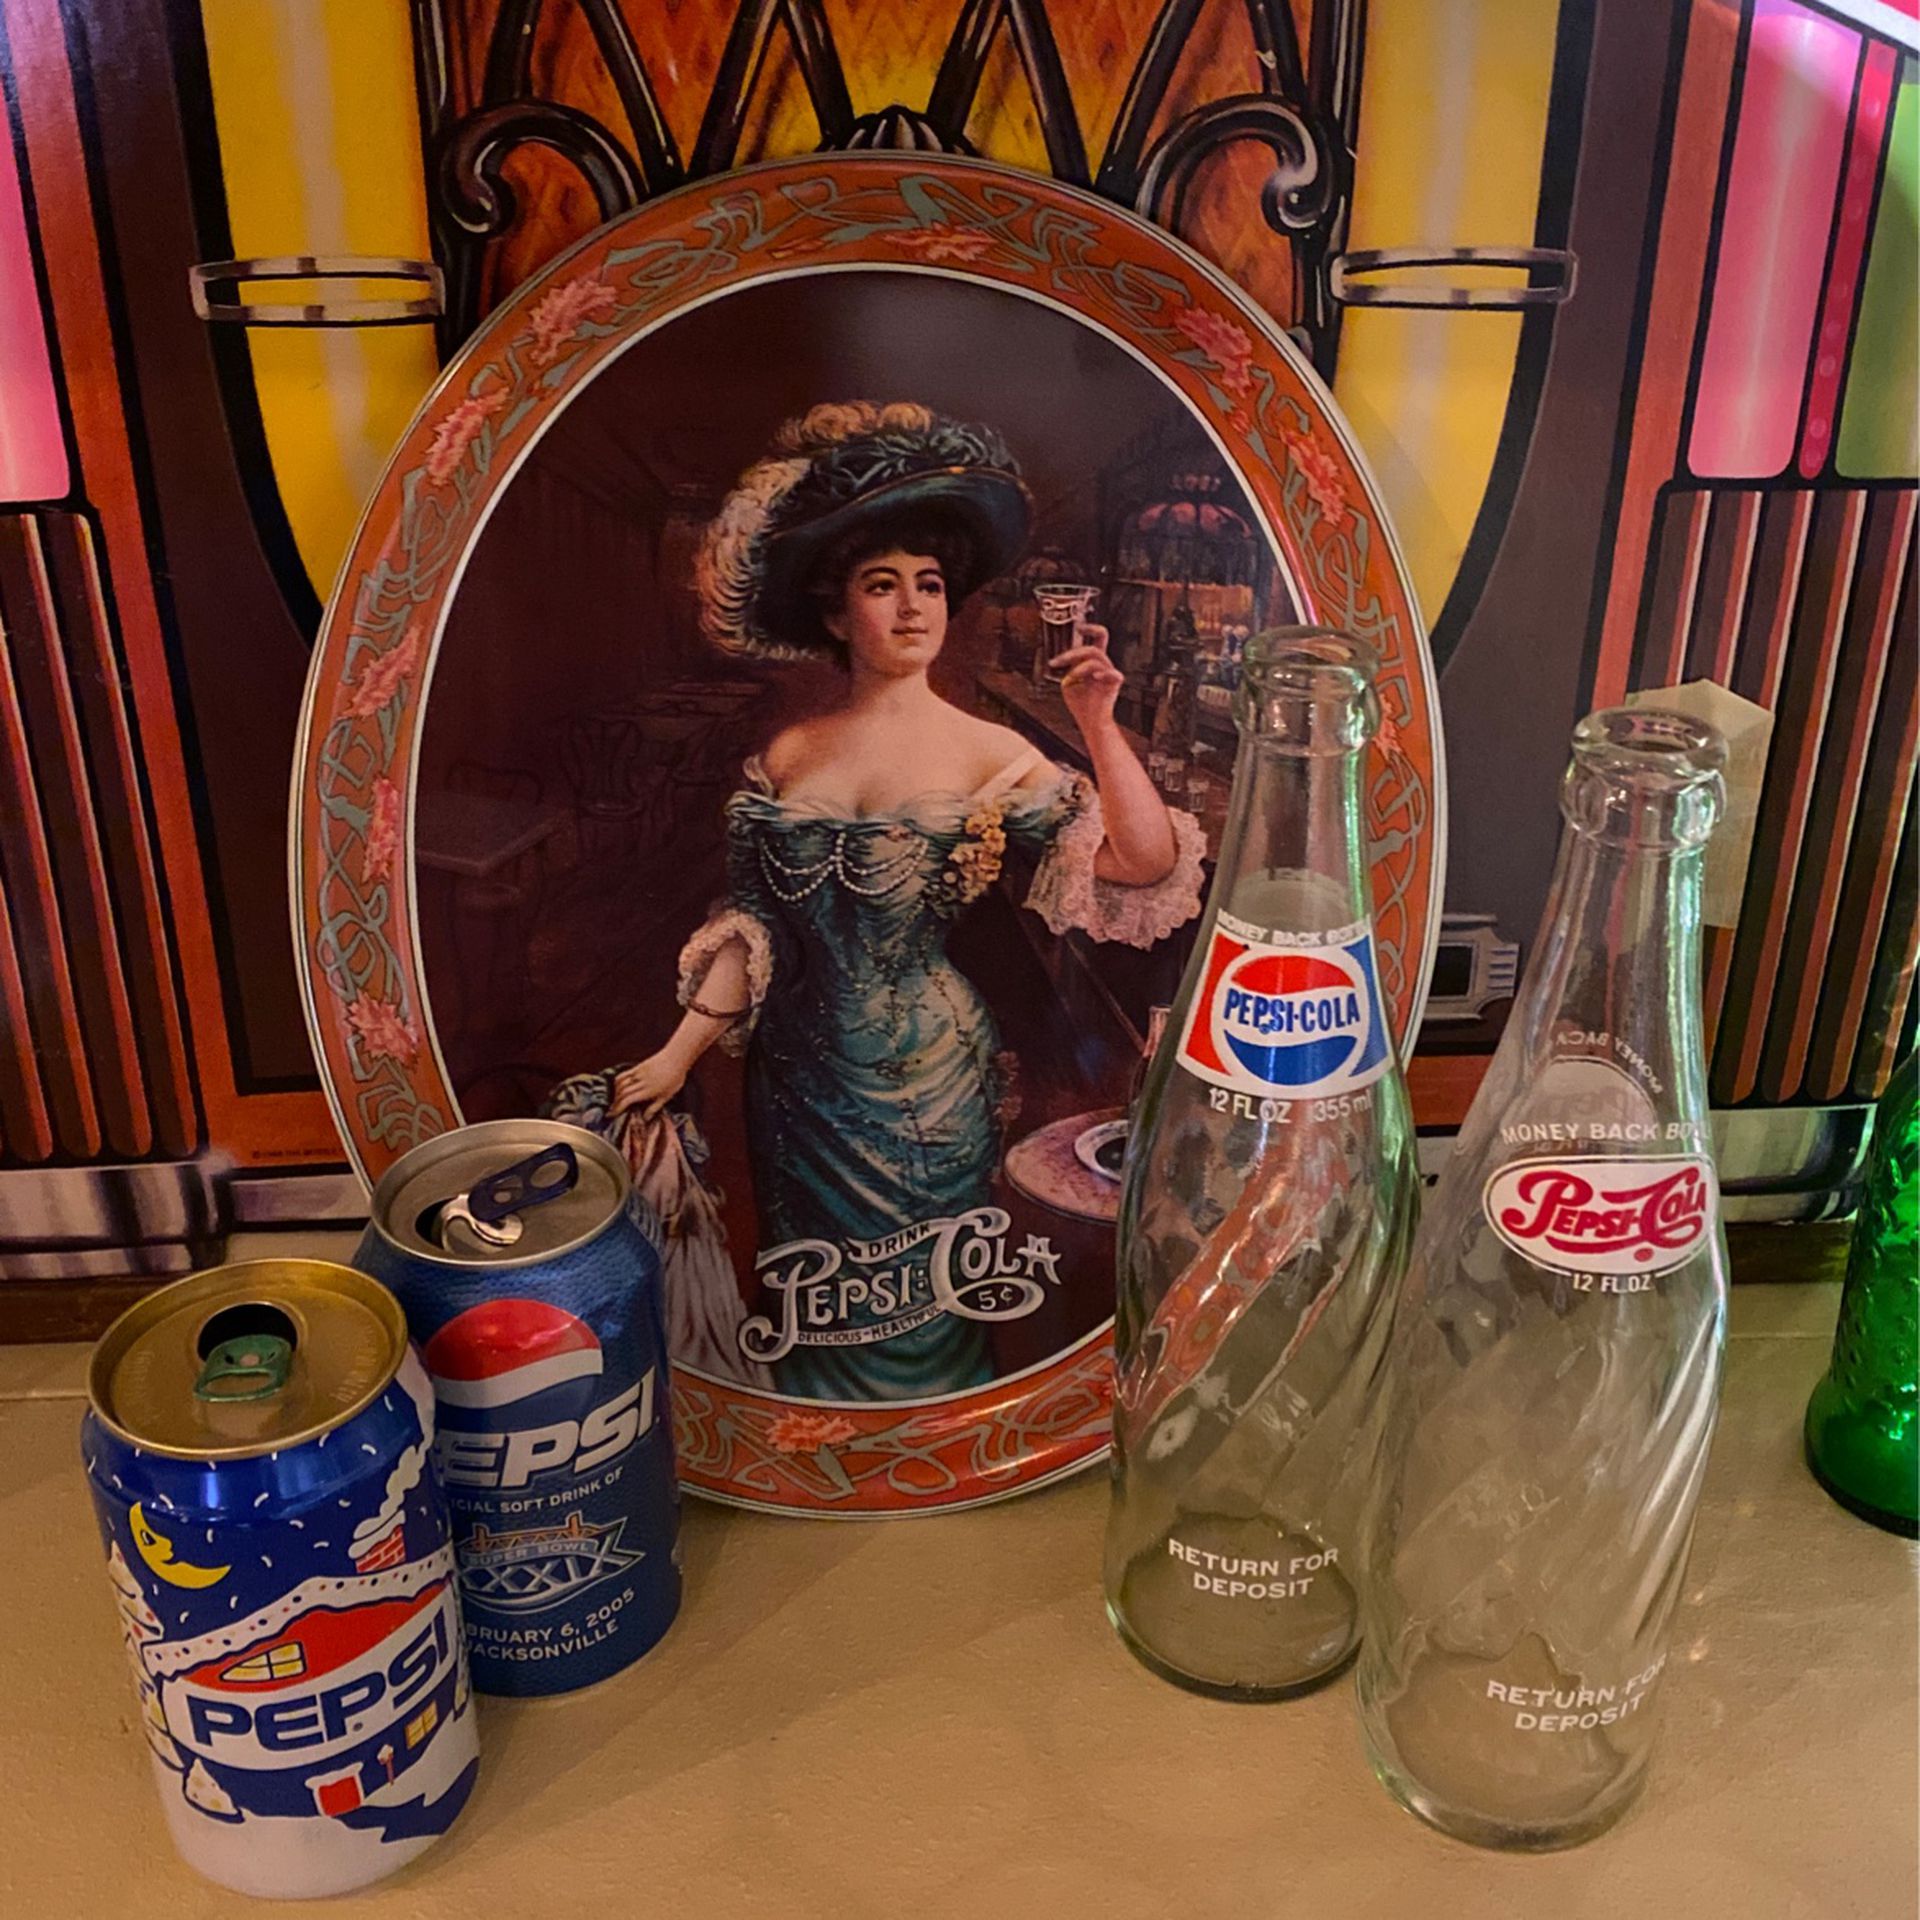 Pepsi serving tray and vintage bottles